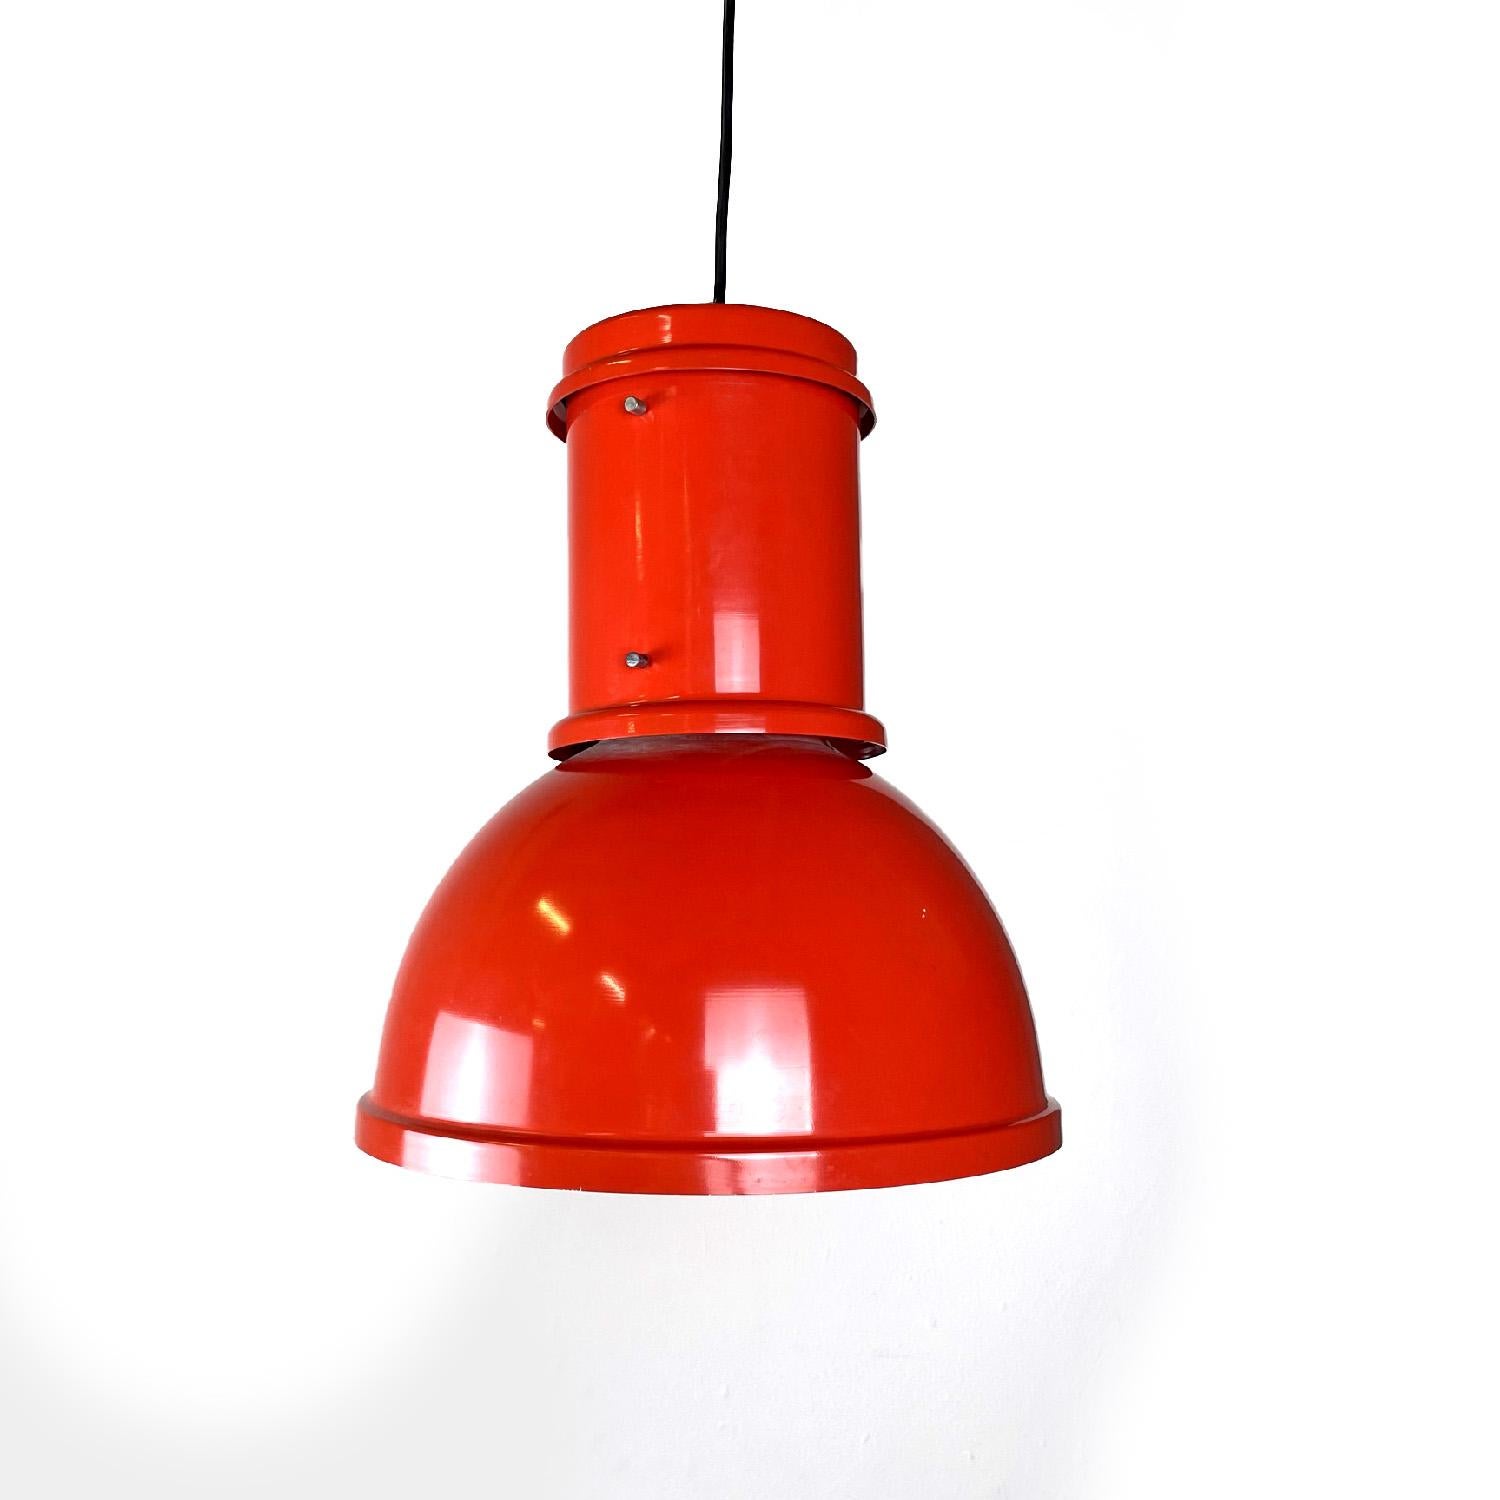 Italian red chandelier Lampara by Roberto Menghi for Fontana Arte, 1960s
Chandelier mod. Lampara with round base in bright red lacquered aluminum. It has a dome-shaped lampshade lacquered white internally, in the upper part there is a cylindrical